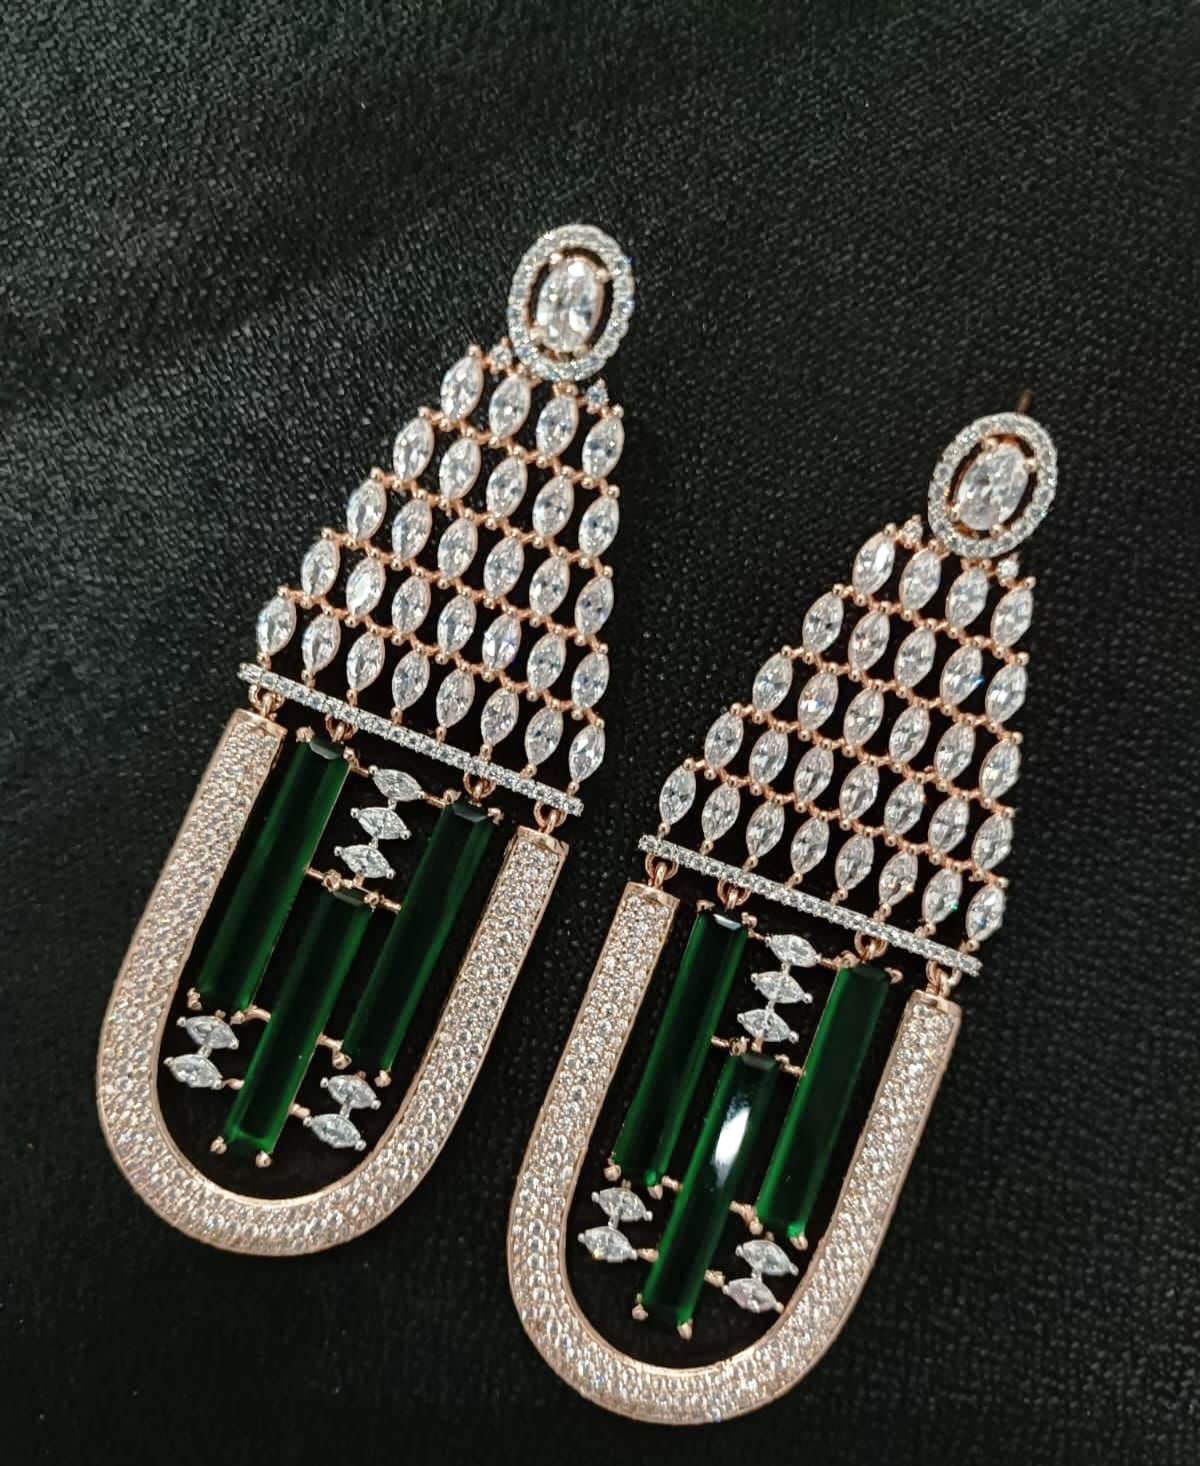 Sagunittujewel: Handcrafted American Diamond Earrings of Exceptional Quality